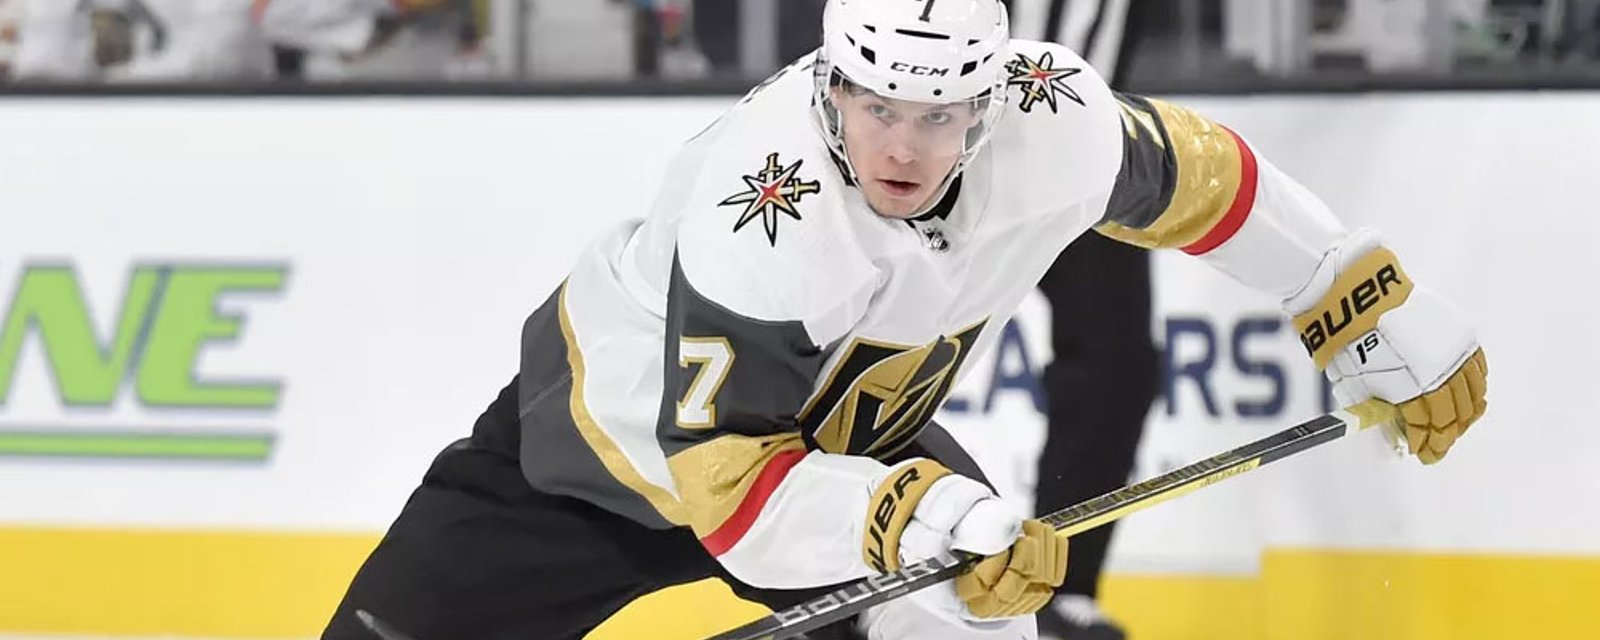 Breaking: Vegas’ Zykov suspended 20 games by NHL